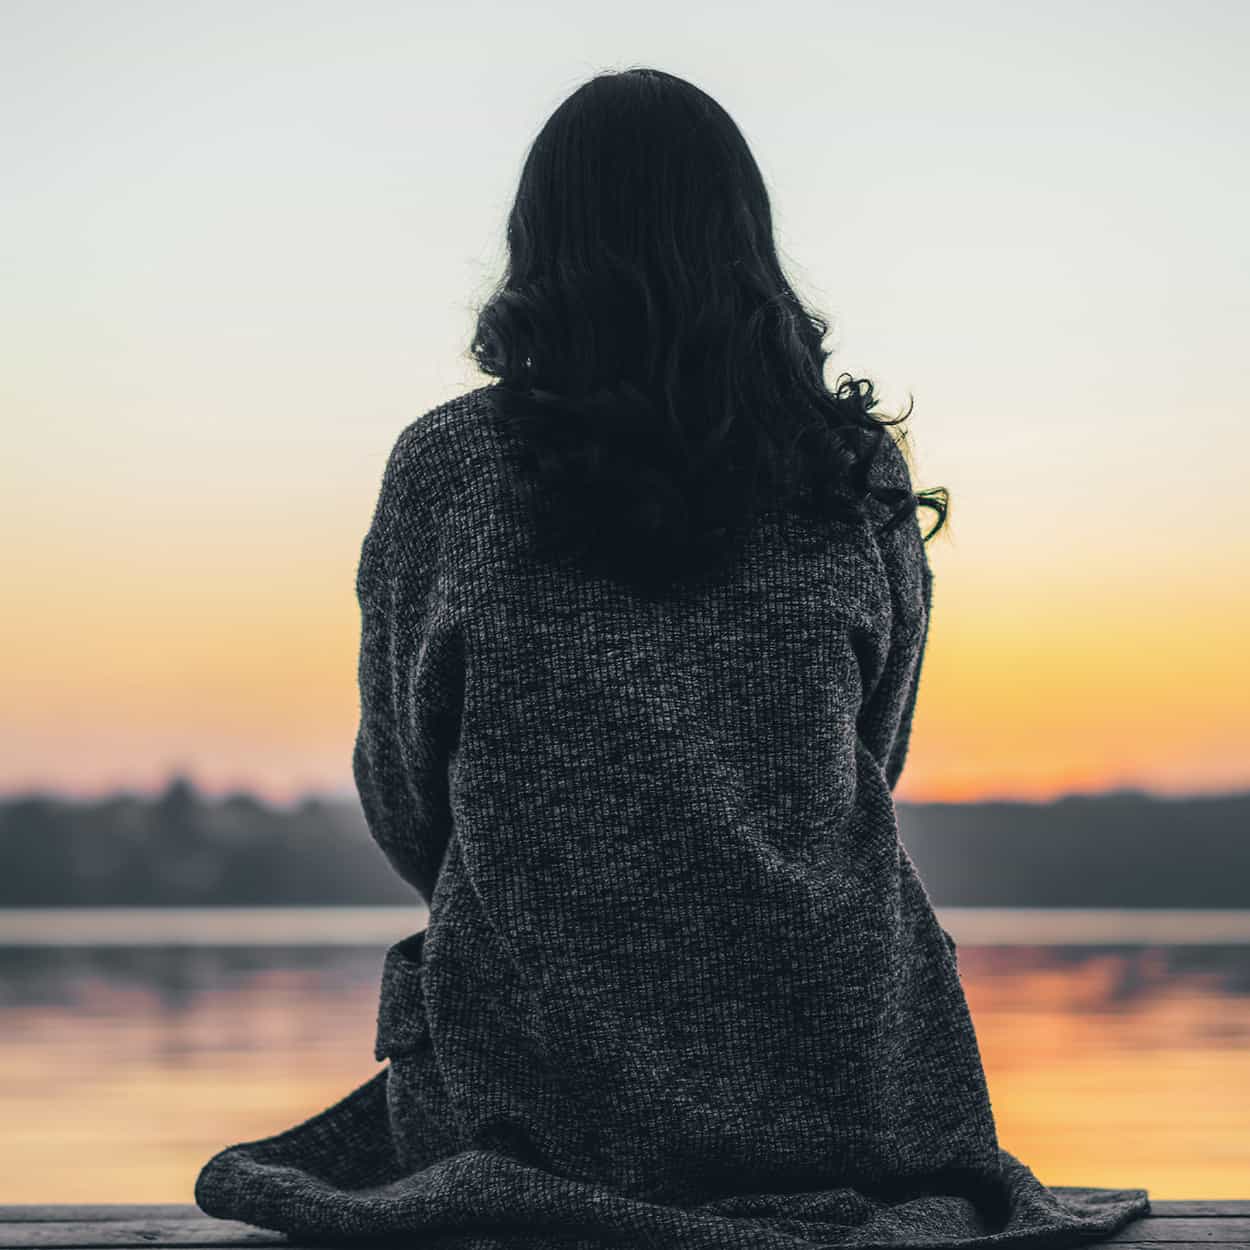 woman sitting and thinking by a lakeside sunset during at-home addiction rehab